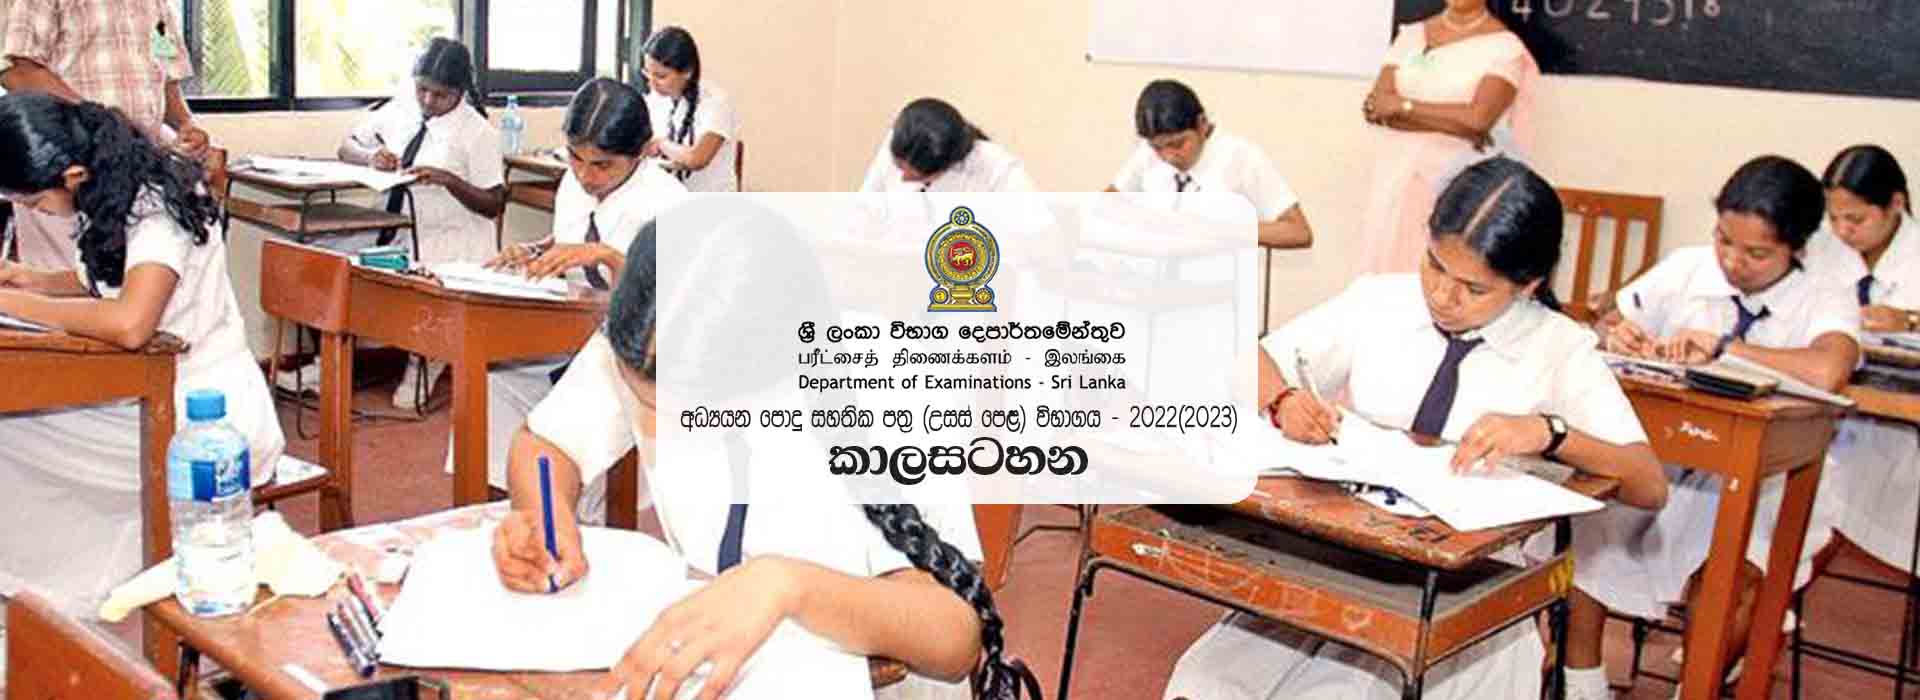 Download GCE A/L Exam Time Table 2022/2023 Department of Examinations in Sri Lanka from www.doenets